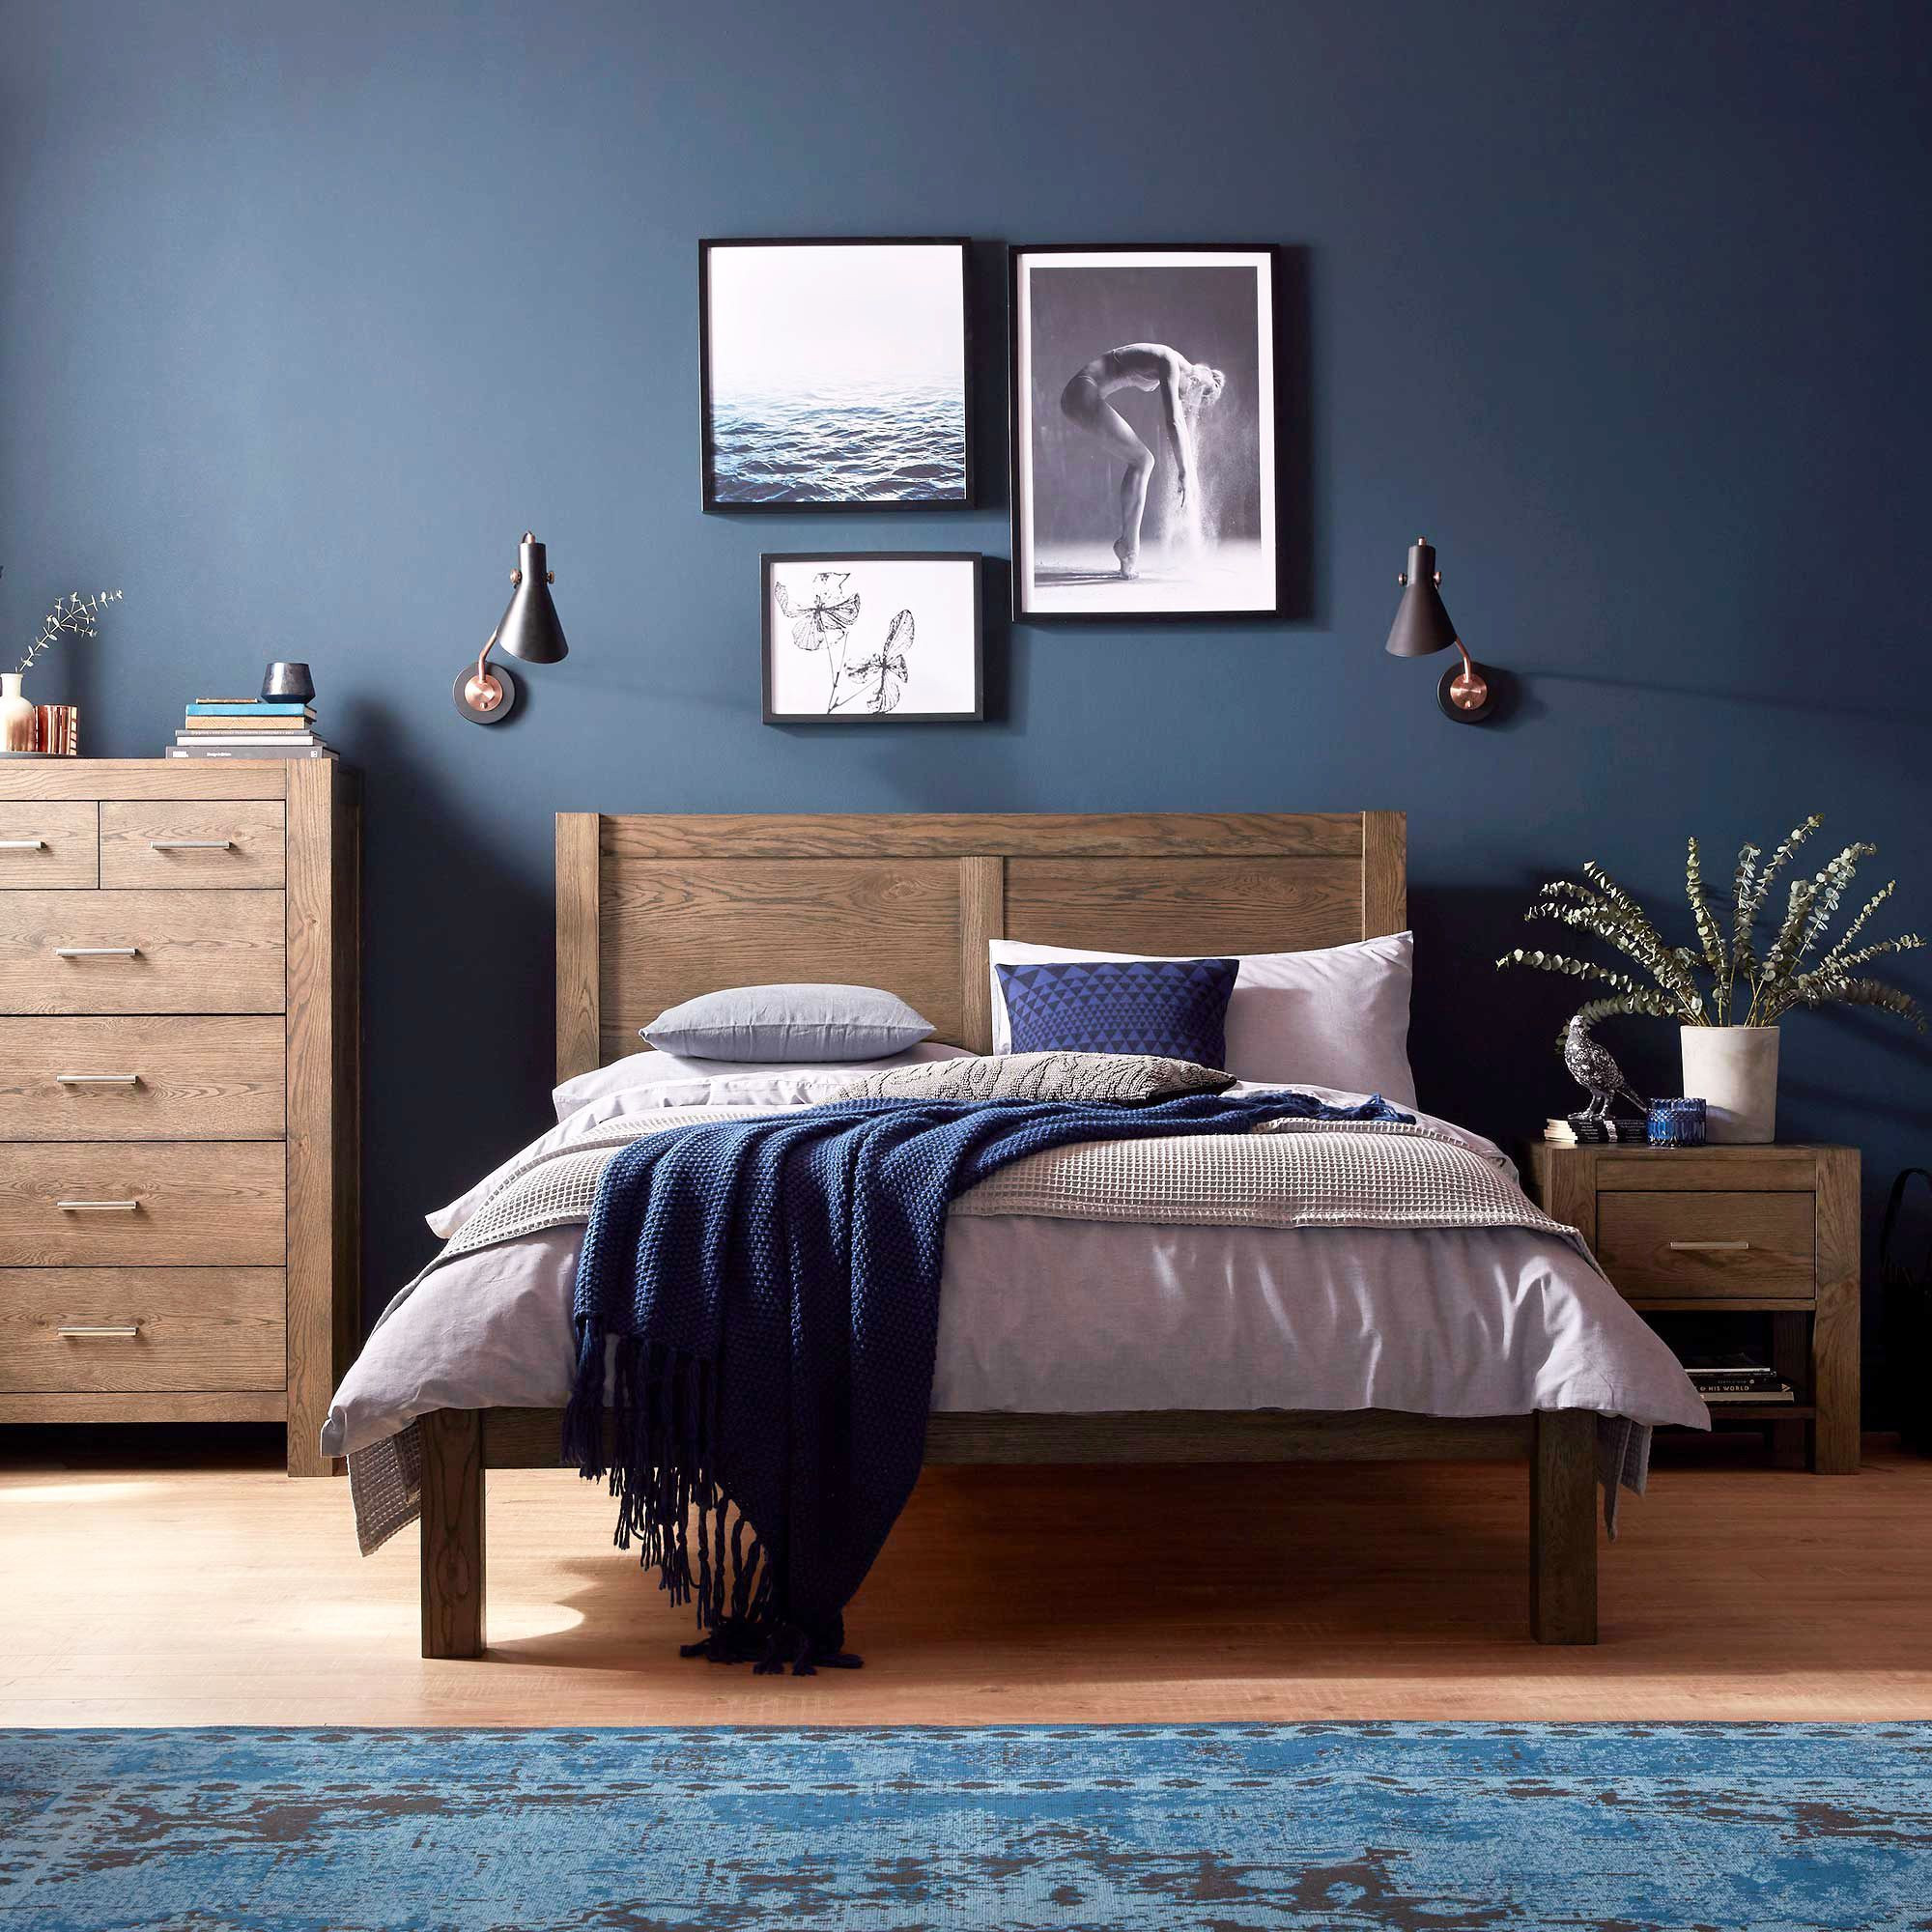 Blue Wall Art For Bedroom
 The Corniche bedroom range is crafted from dark American